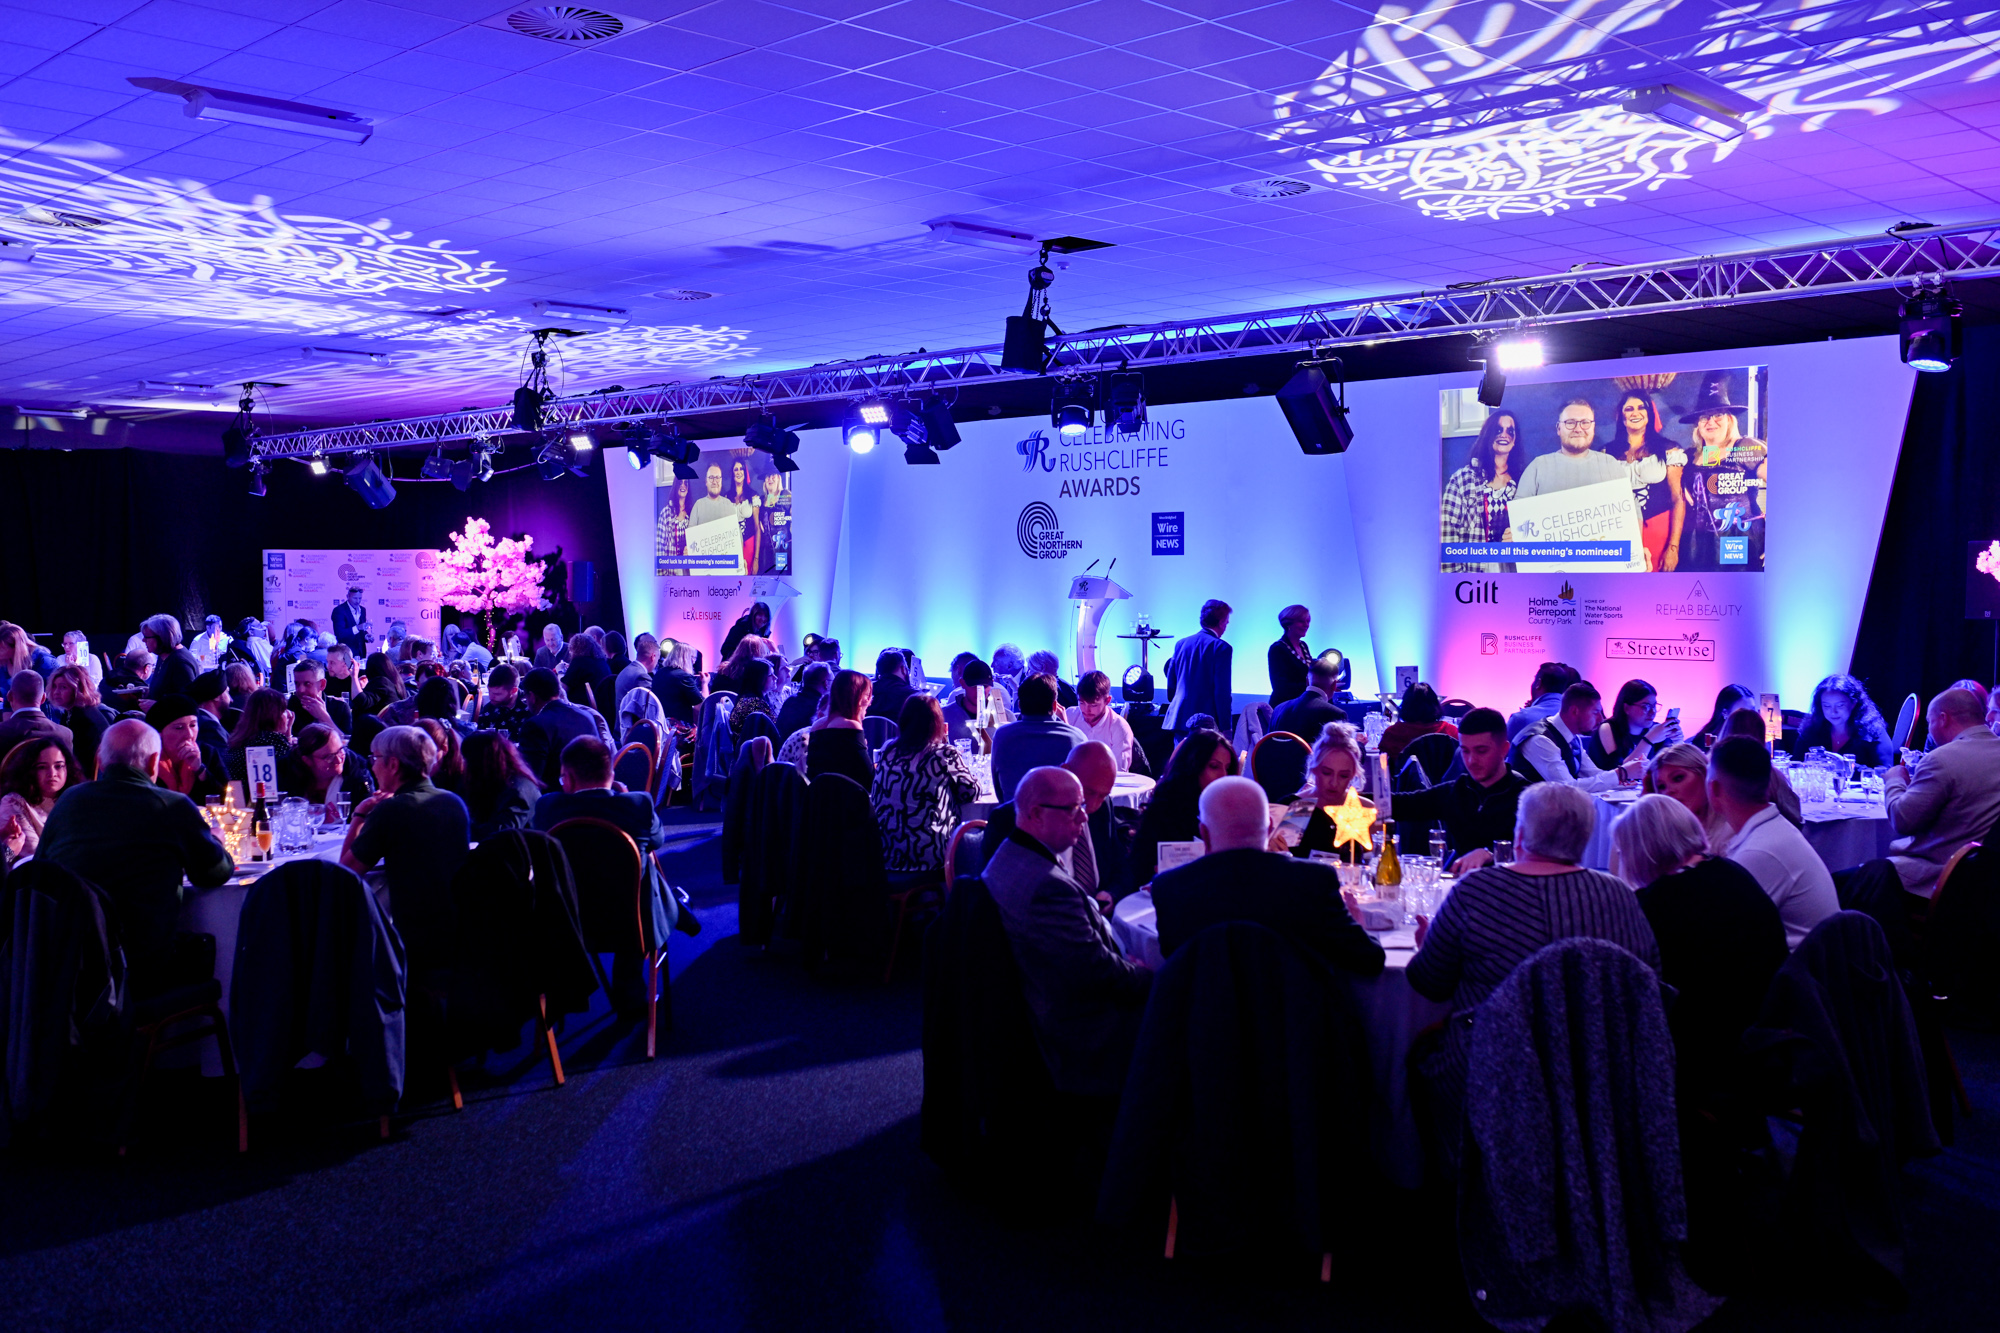 Nominations are now open for The Celebrating Rushcliffe Awards 2023